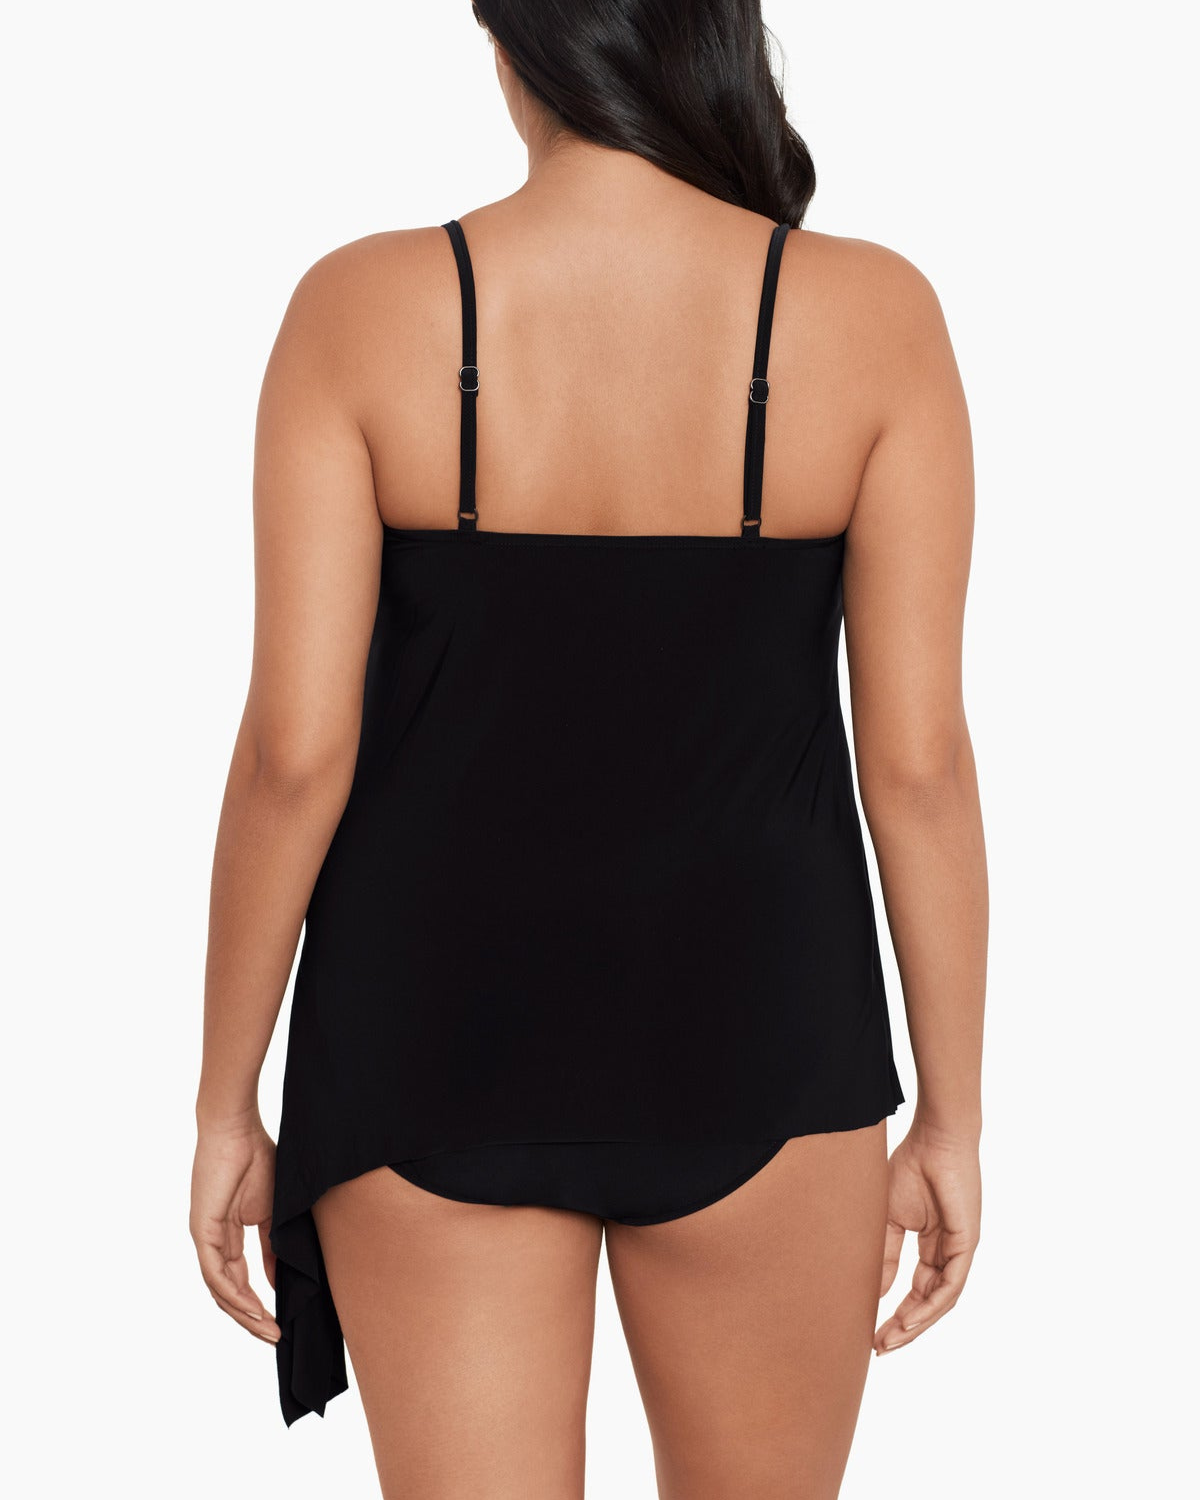 Model wearing a tankini top in black with hidden underwire, tie side and adjustable straps in black